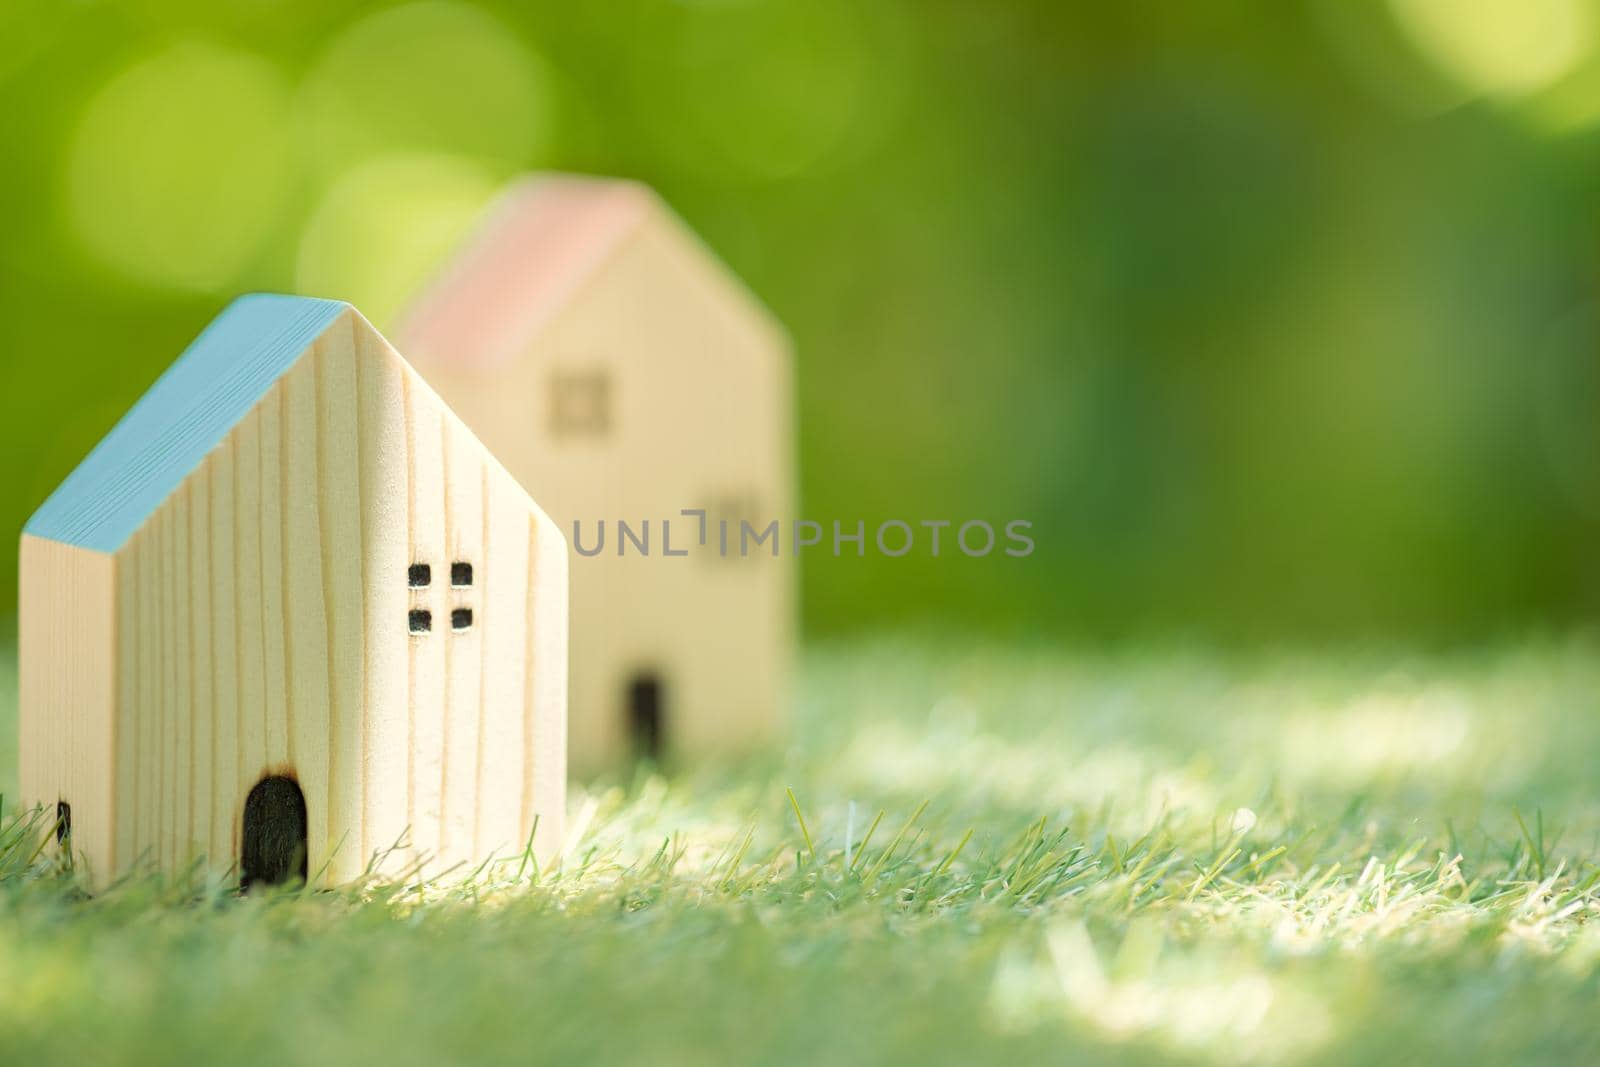 Small wooden home in green nature background for eco house village community postcard banner image. by qualitystocks